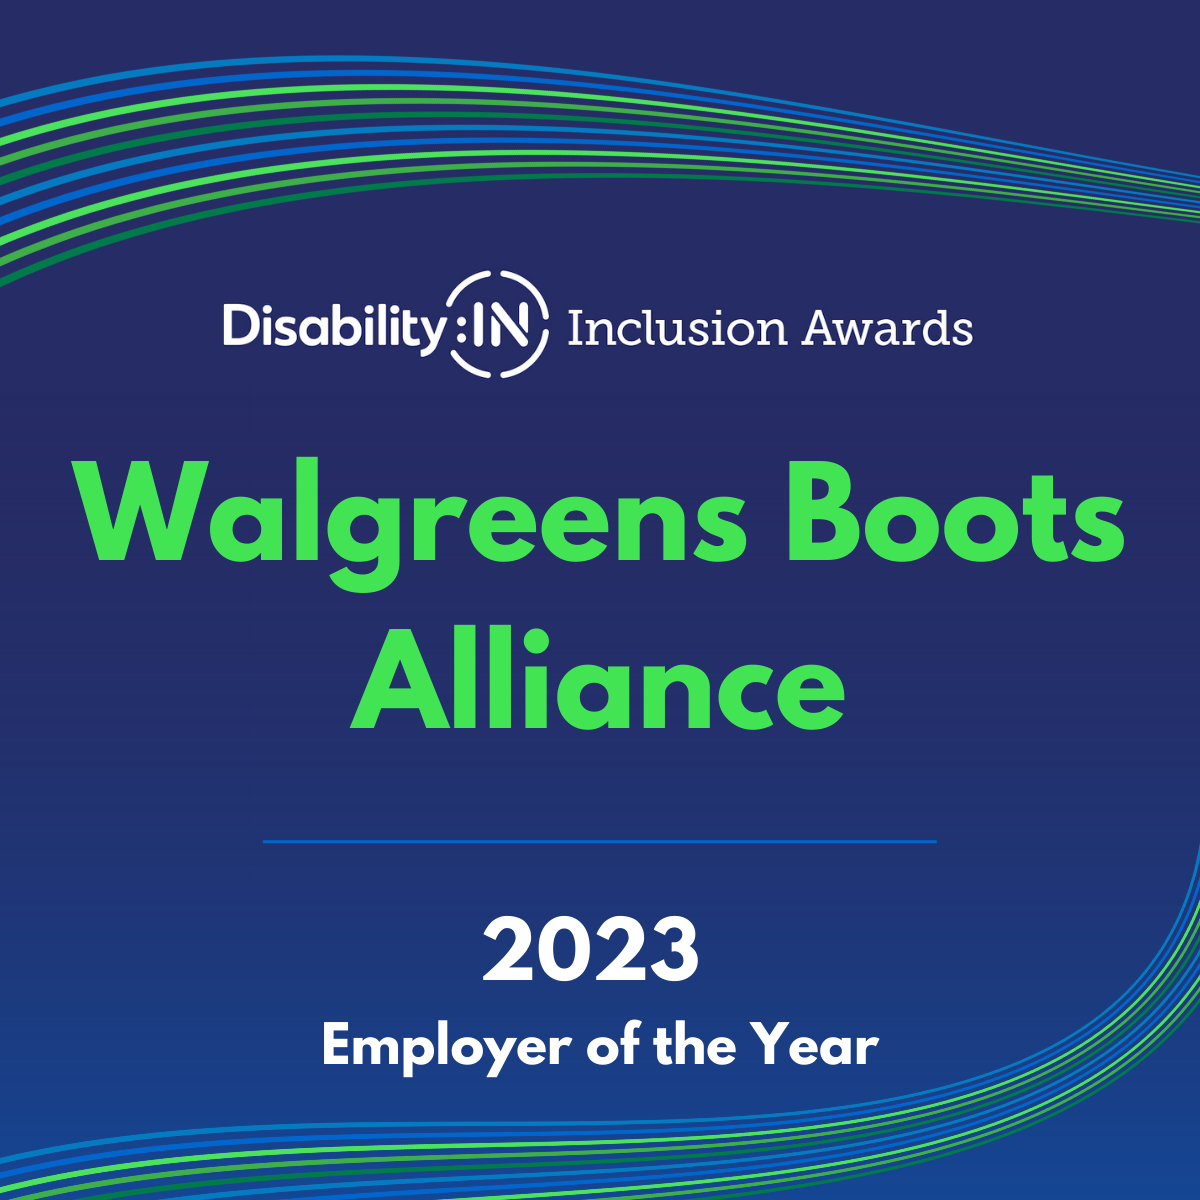 Walgreens Boots Alliance Named Disability:IN’s 2023 Employer of the Year